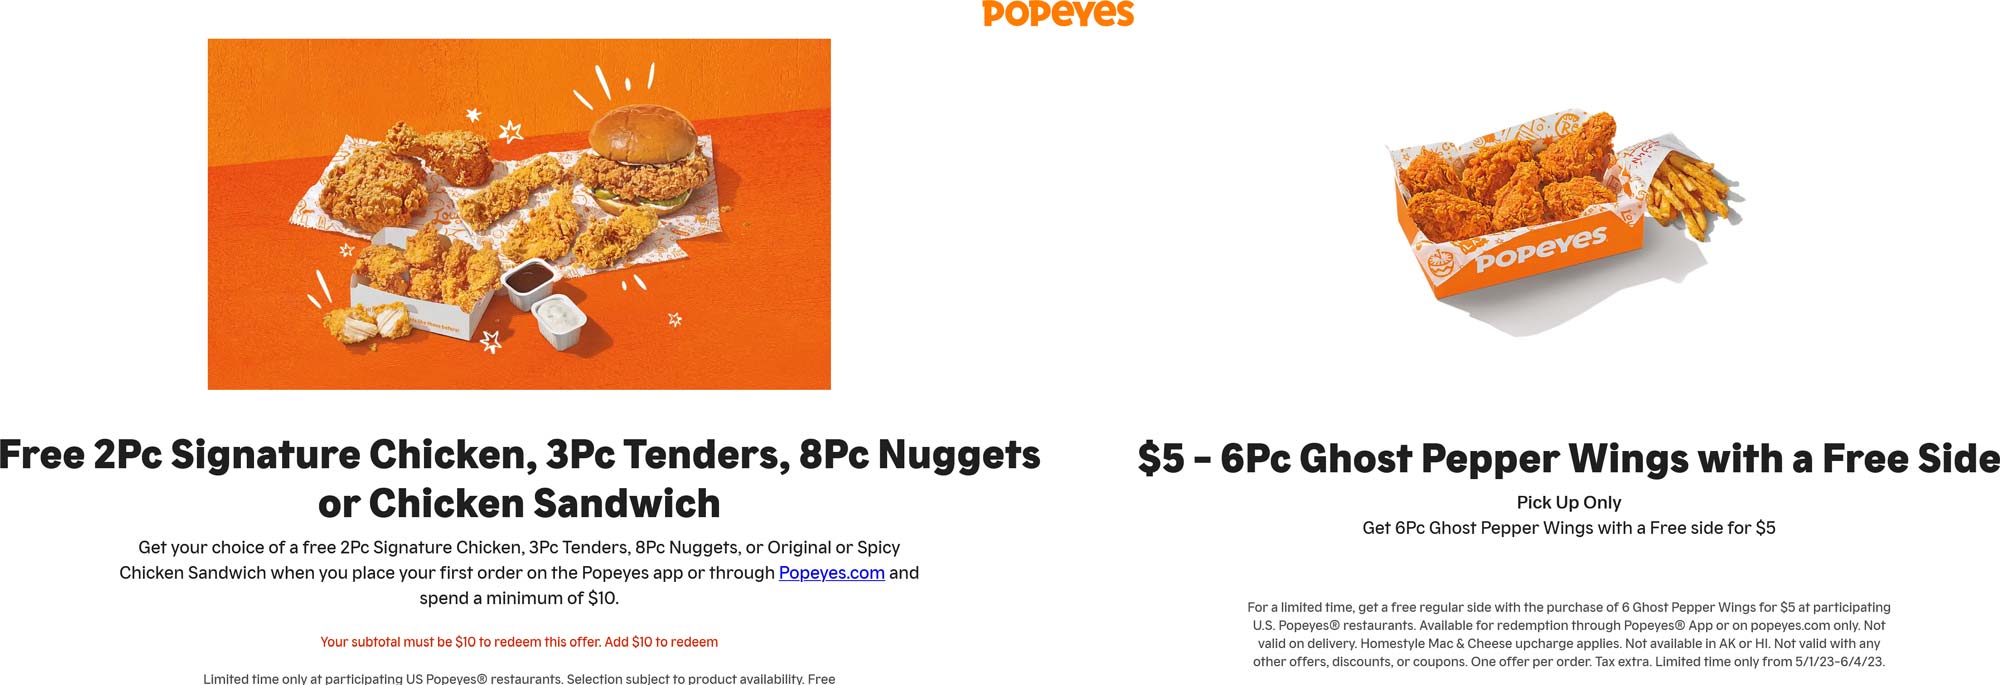 Popeyes restaurants Coupon  Free 8pc chicken nuggets online & more at Popeyes #popeyes 